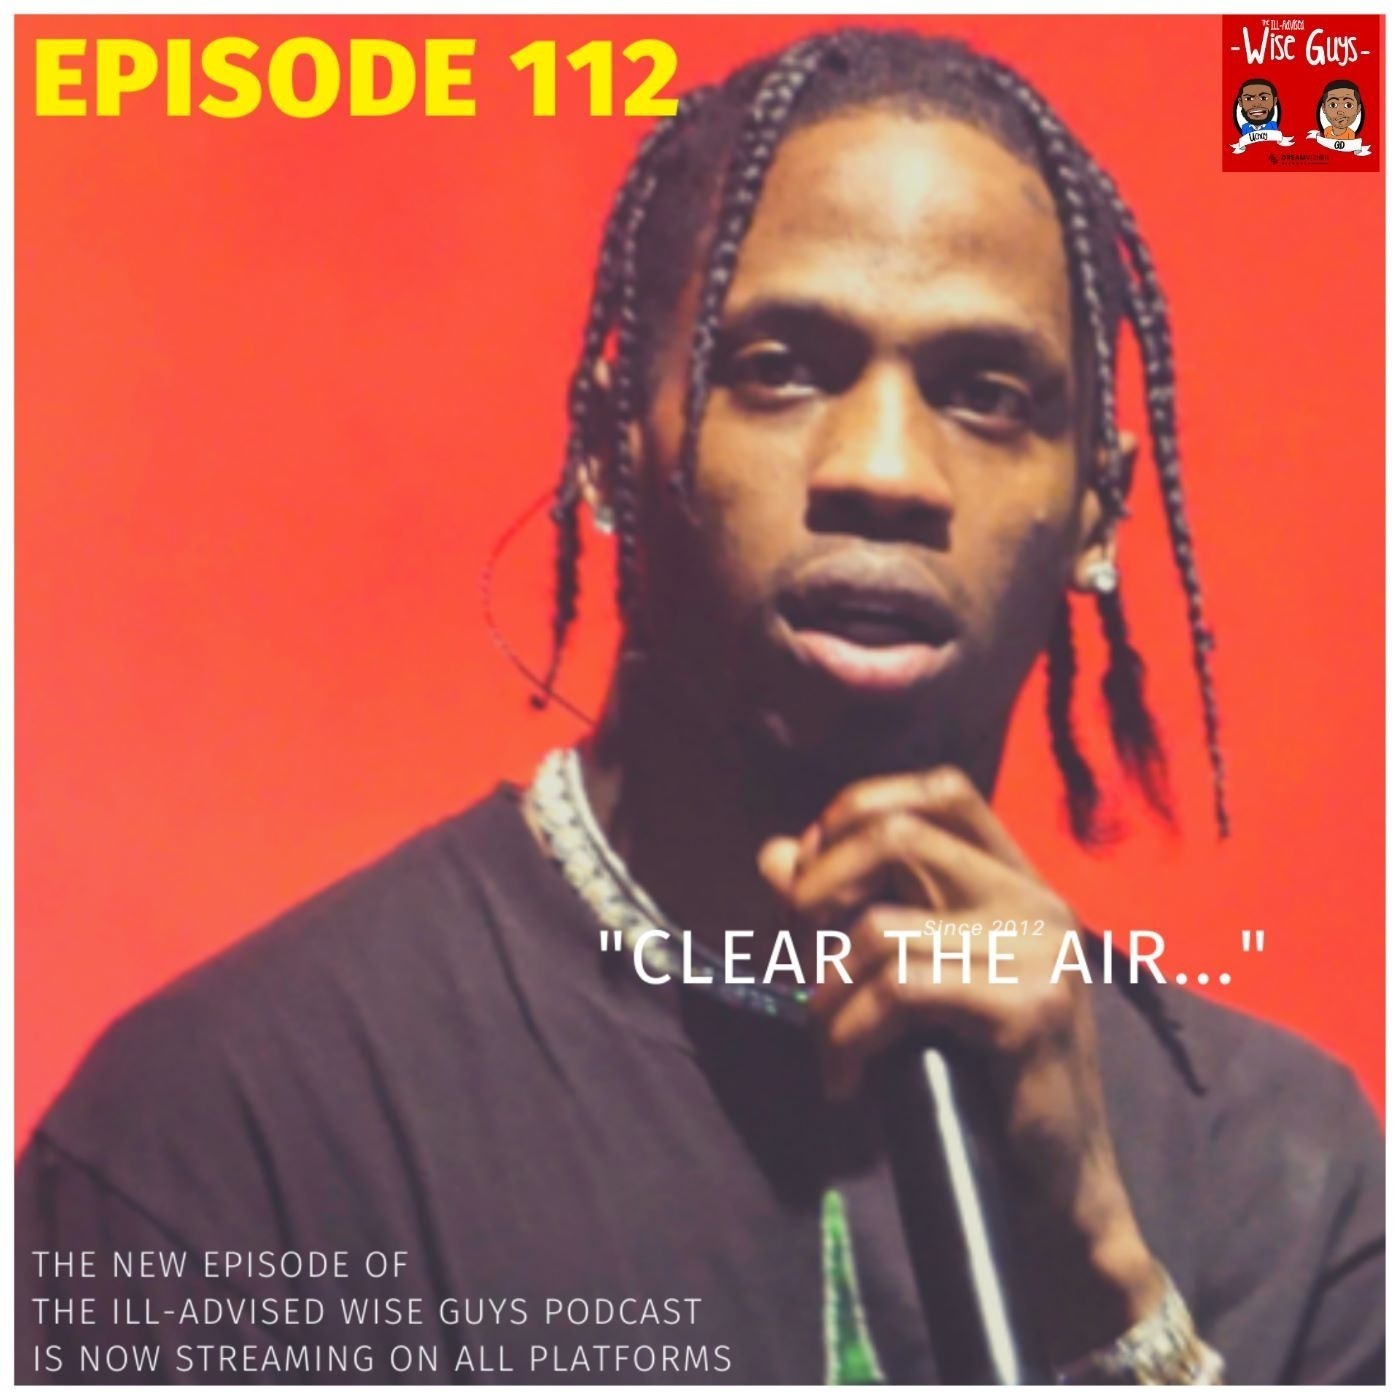 Episode 112 - "Clear The Air..." Image